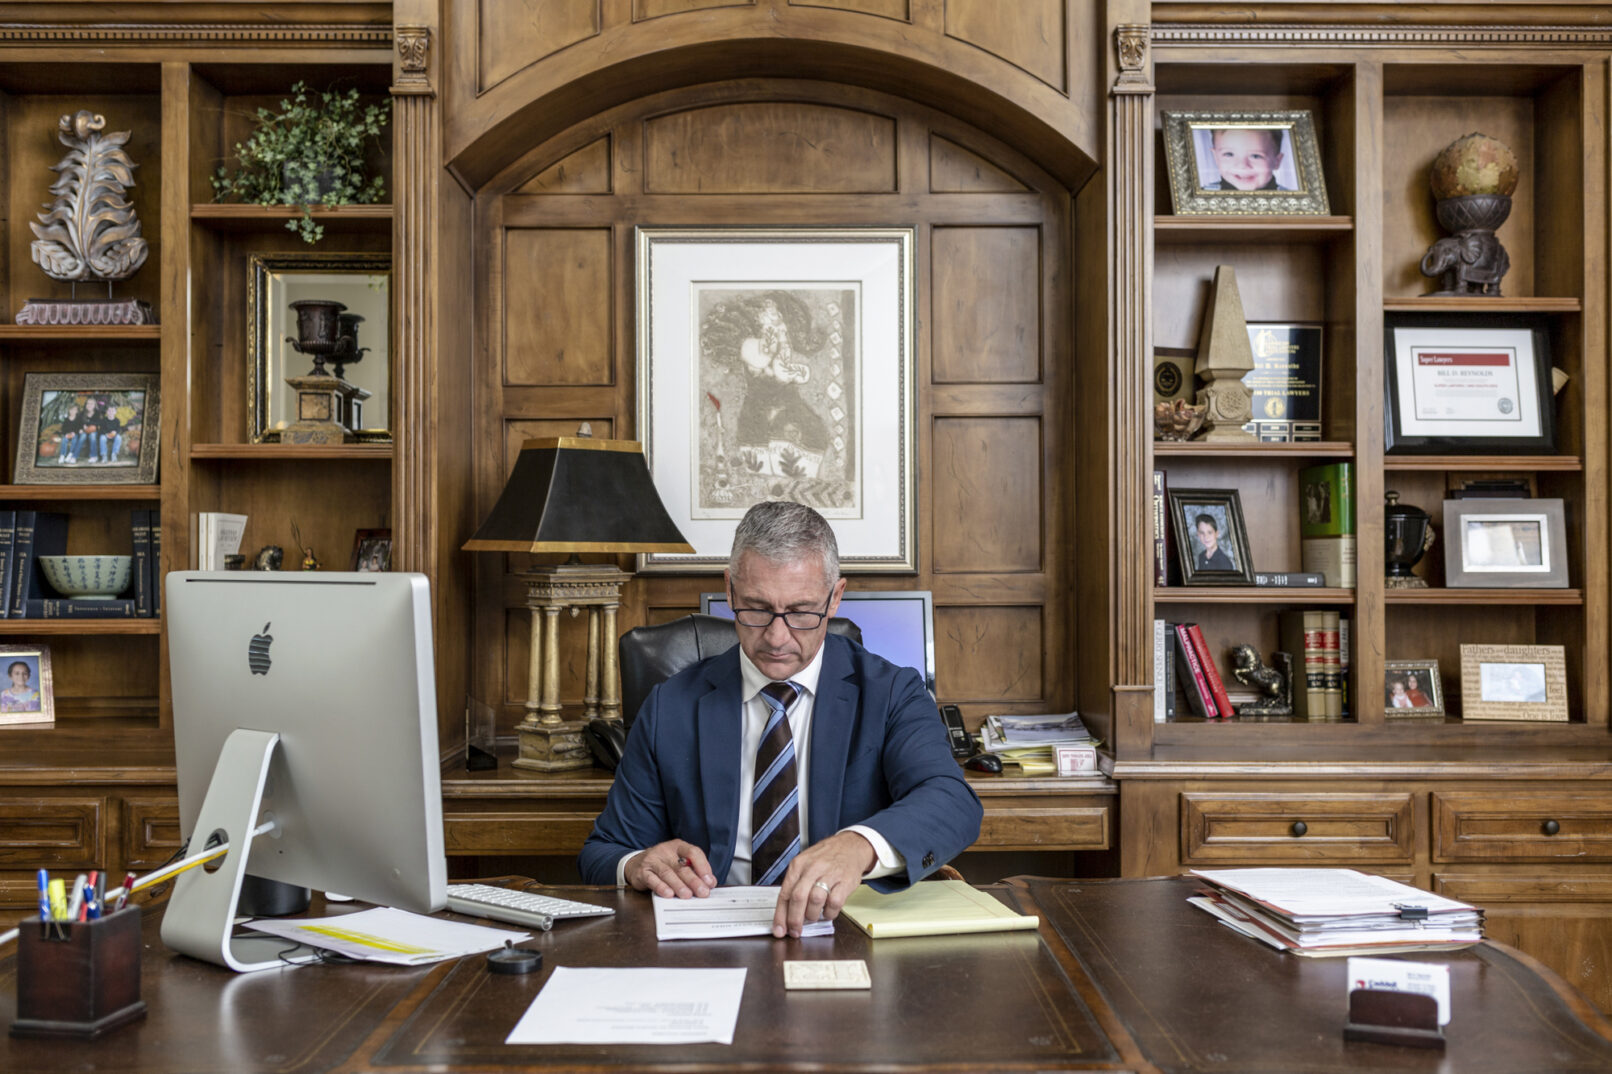 An attorney looks over papers while sitting at his desk.